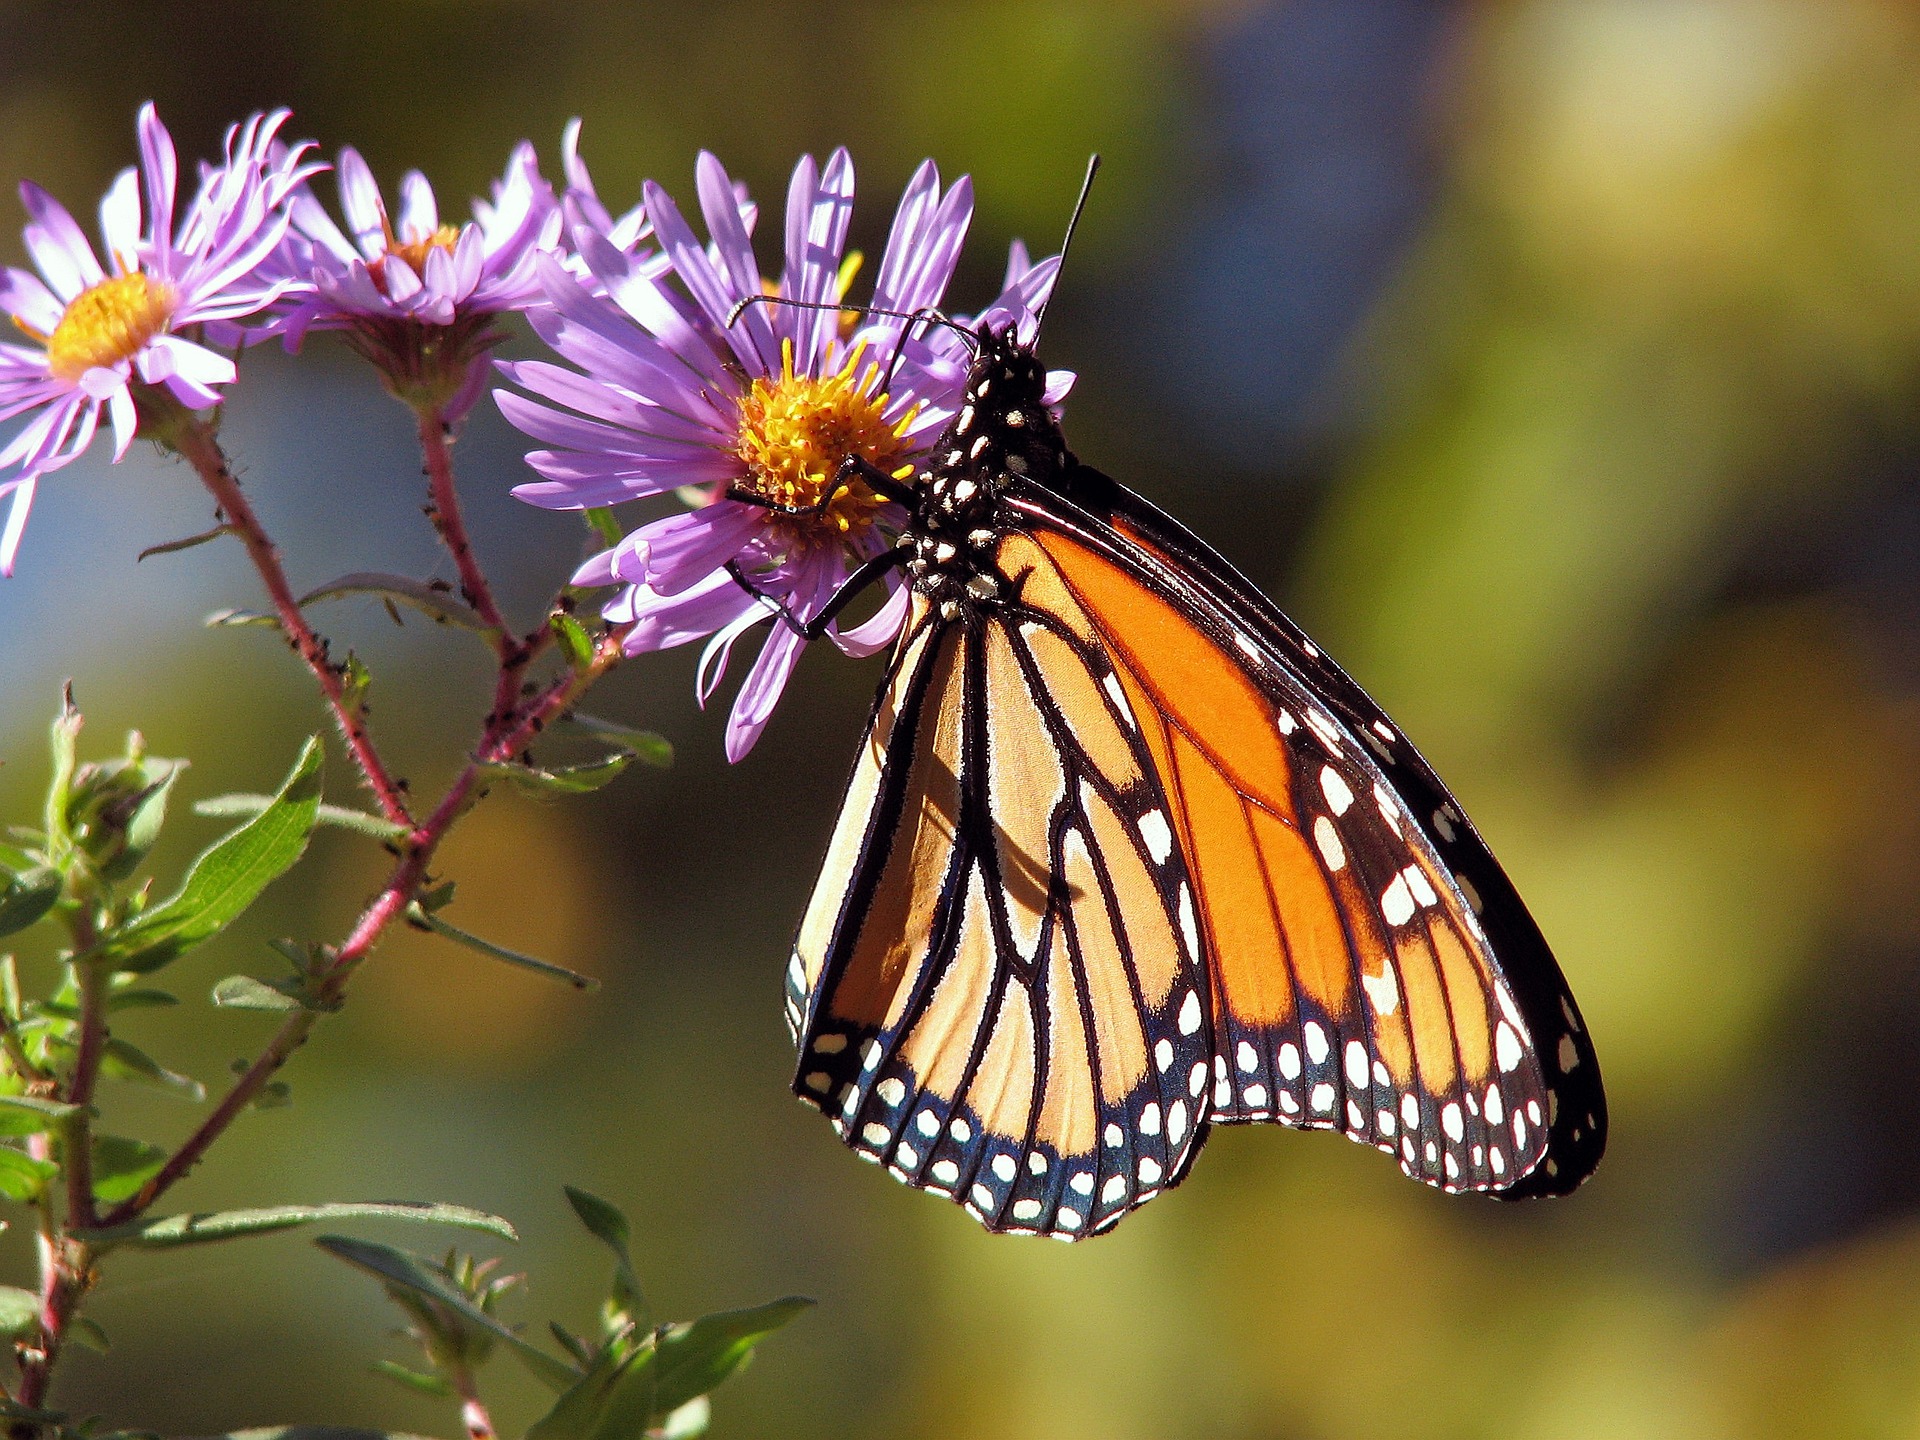 Picture of a monarch butterfly on a pinkish/purplish flower